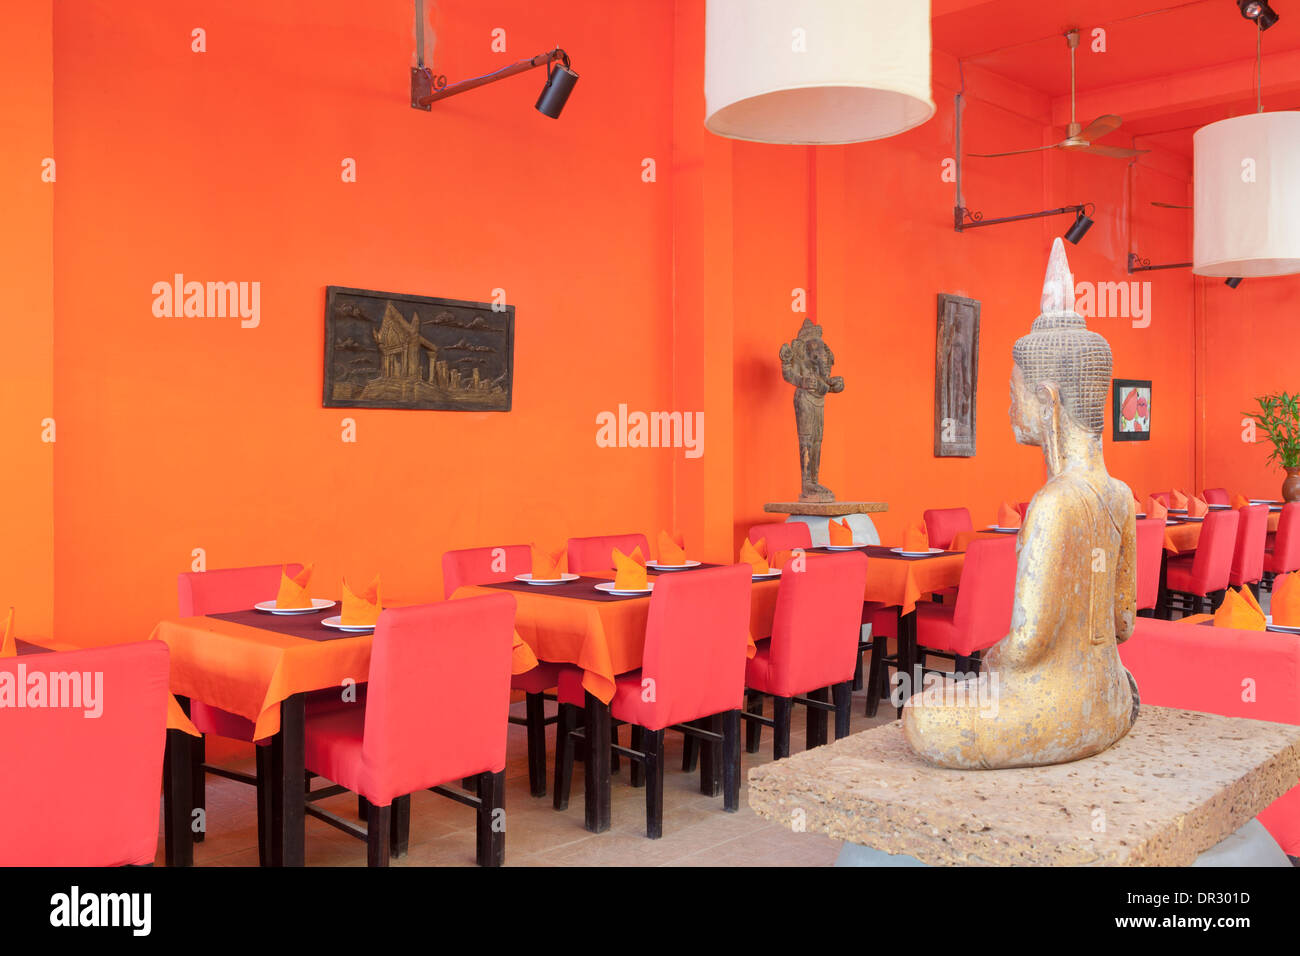 Colouful restaurant interior with Buddha images in Siem Reap, Cambodia Stock Photo